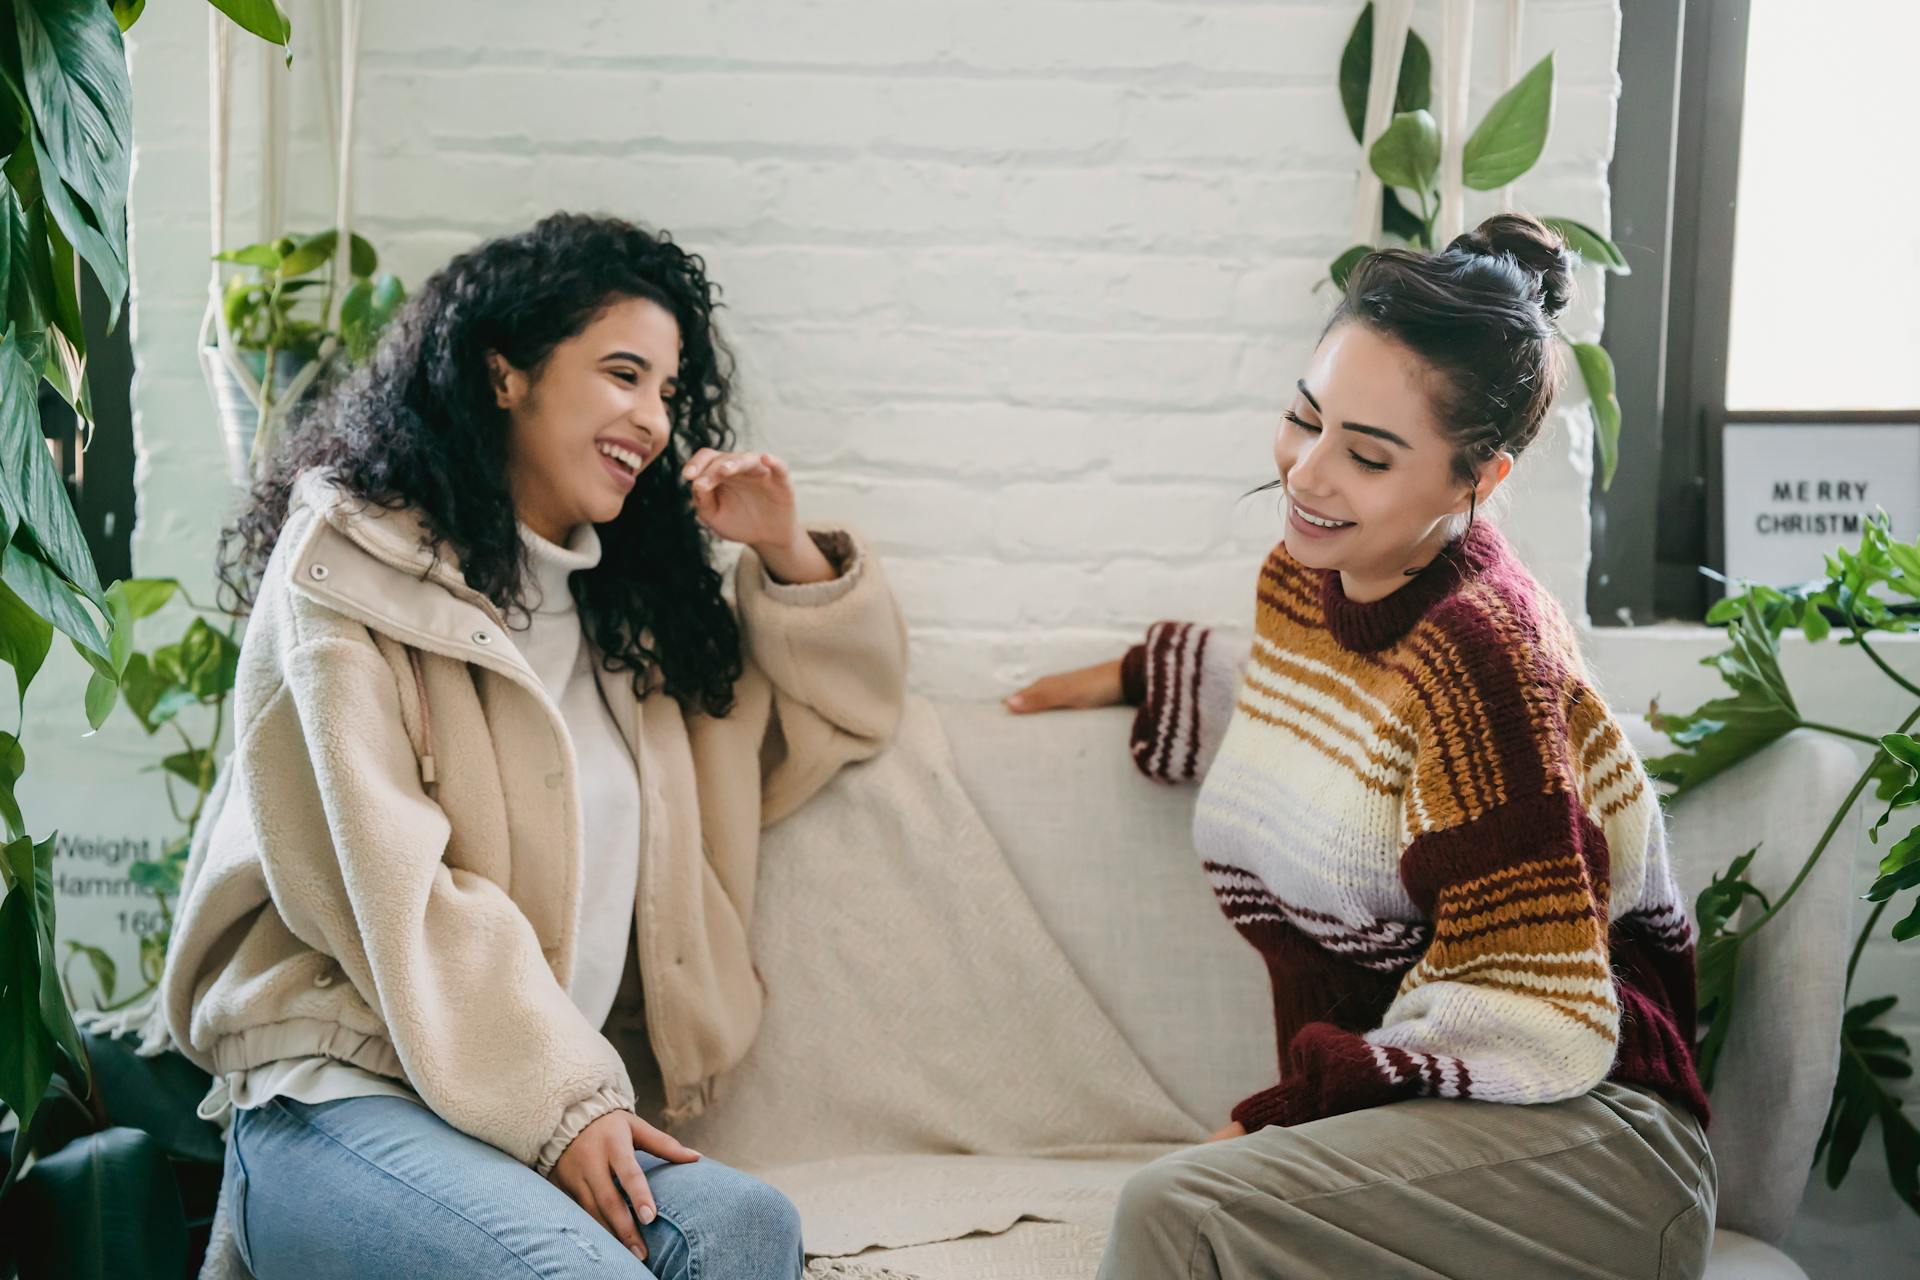 Two women sitting on a couch | Source: Pexels